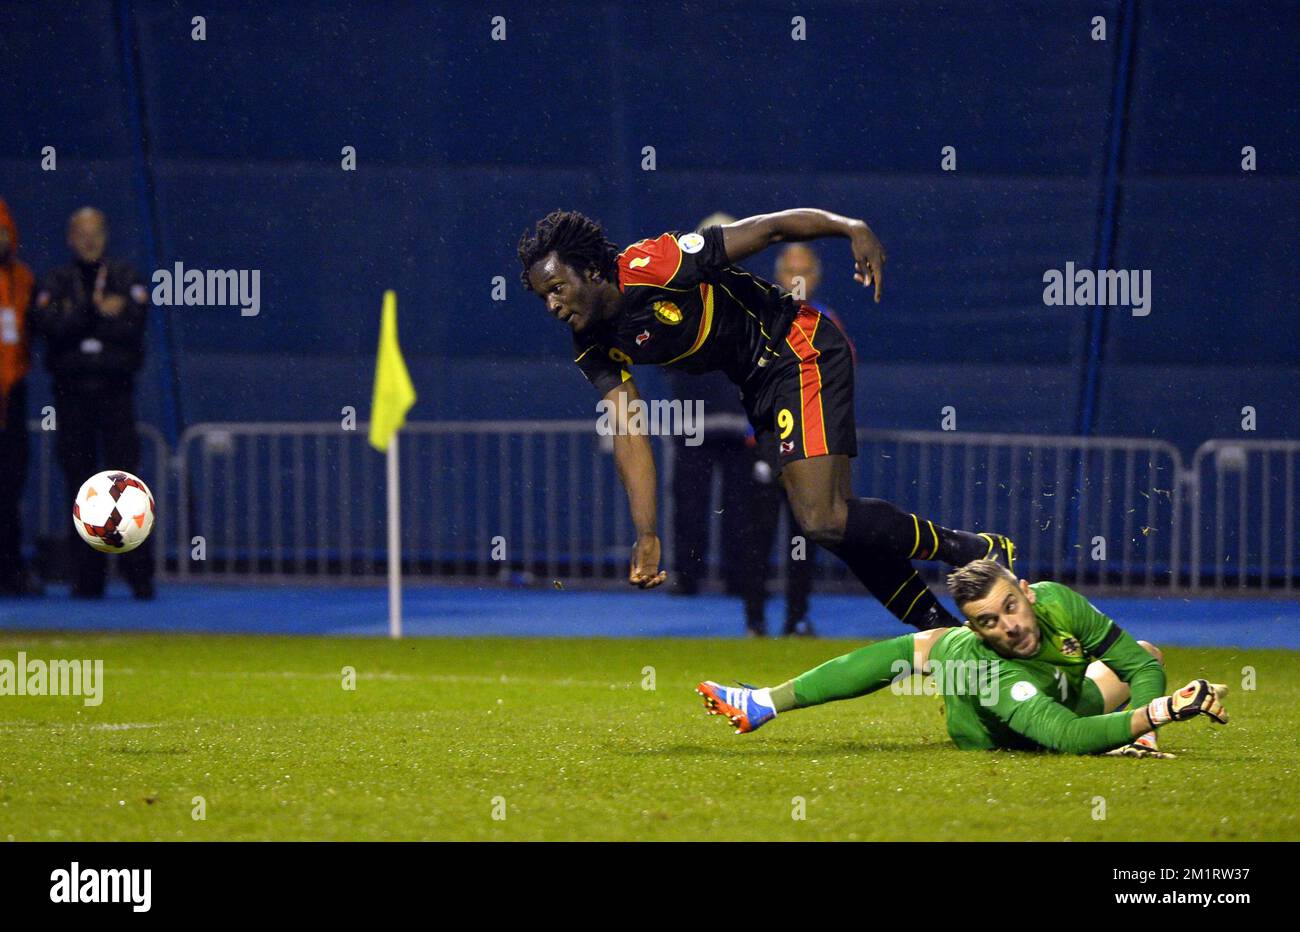 20131011 - ZAGREB, CROATIA: Belgium's Romelu Lukaku passes Croatia's goalkeeper Stipe Pletikosa and scores a goal during a soccer game between Belgian national team The Red Devils and the Croatian national team in the Maksimir stadium in Zagreb, Croatia, Friday 11 October 2013, a qualification game for the 2014 FIFA World Cup. With two games to play the Red Devils are leading group A, they need one more point to qualify for the World Cup as group winner. BELGA PHOTO ERIC LALMAND Stock Photo